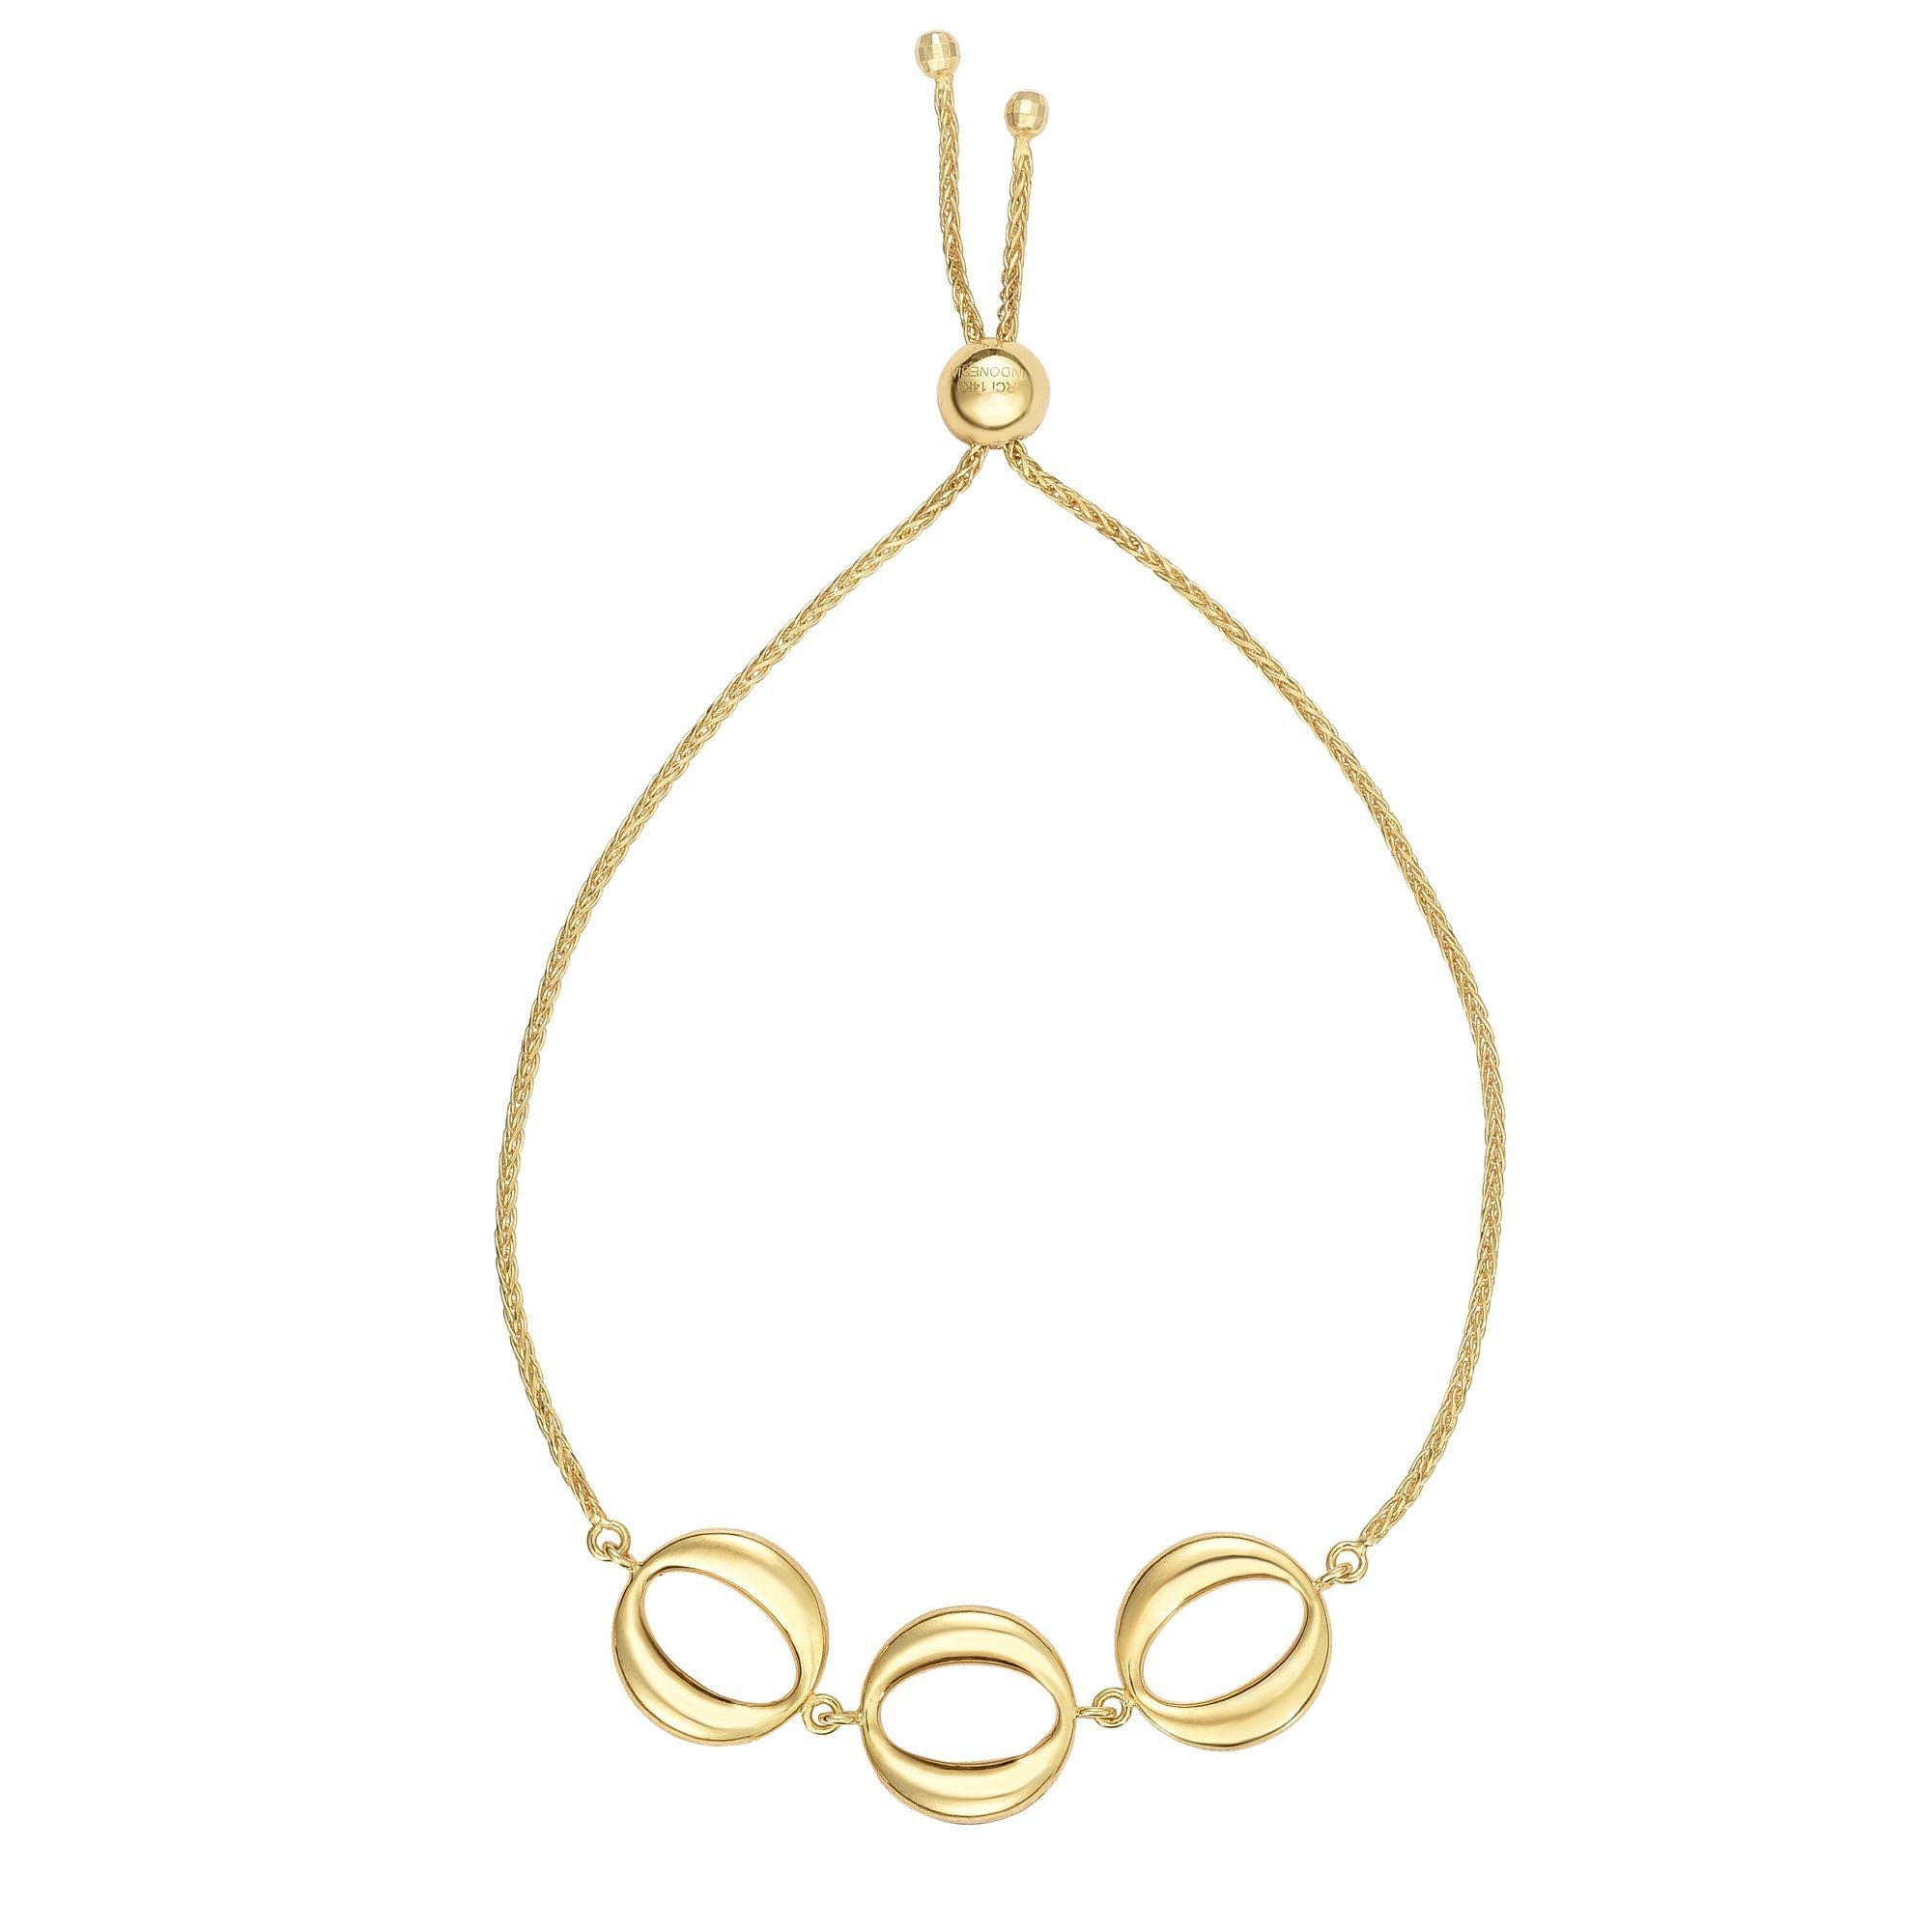 14k Yellow Gold Adjustable Circle Charms Bolo Bracelet, 9.25" fine designer jewelry for men and women